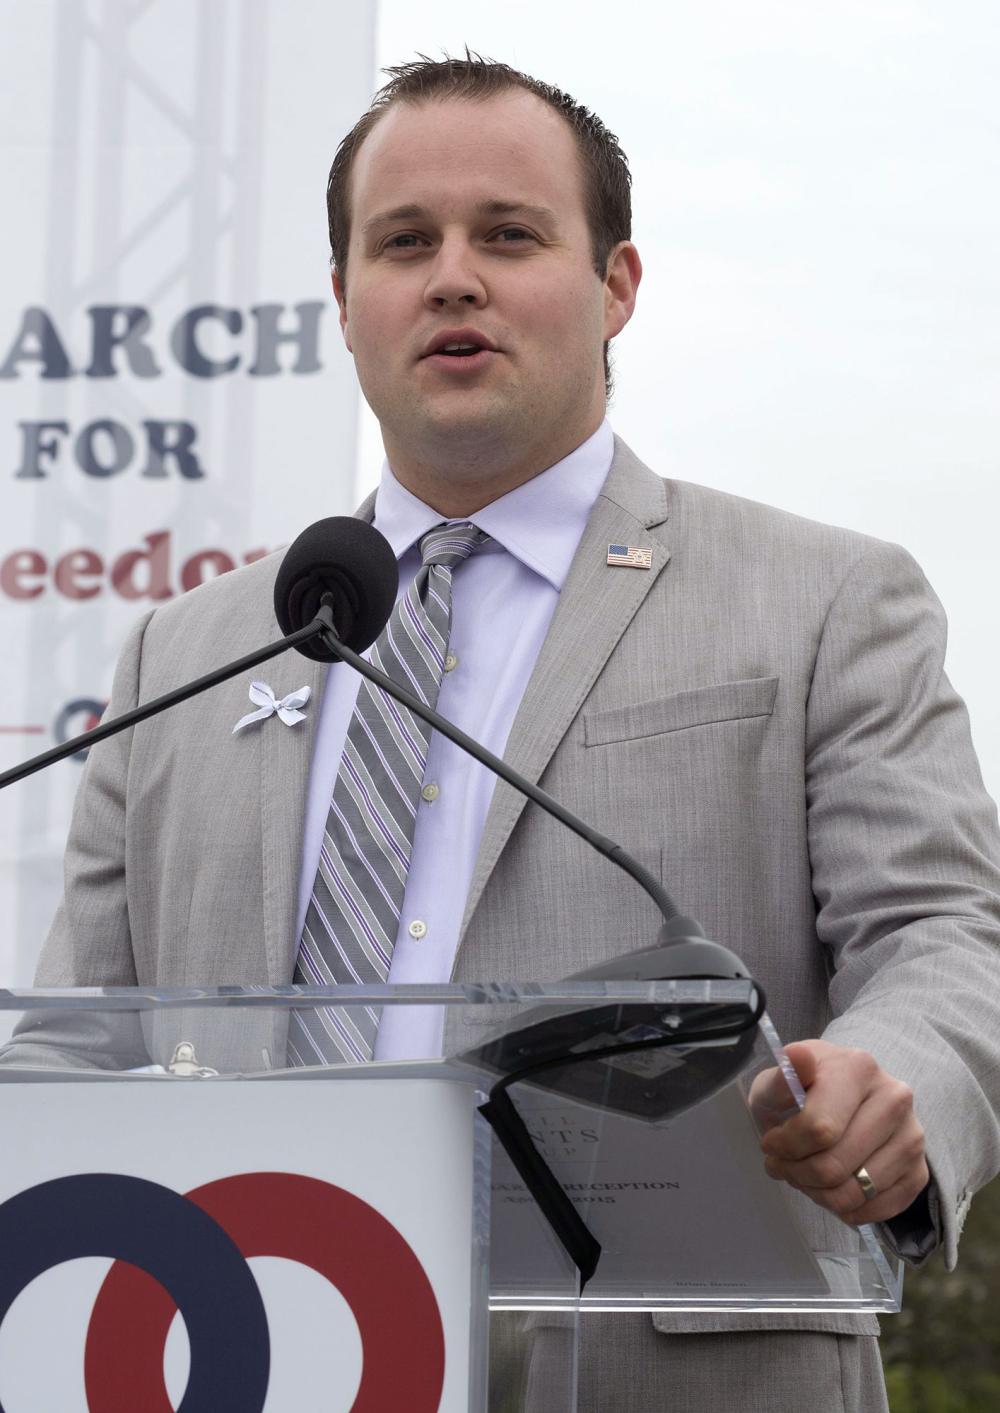 Josh Duggar Lawyers File Motion for New Trial 1 Month After Conviction